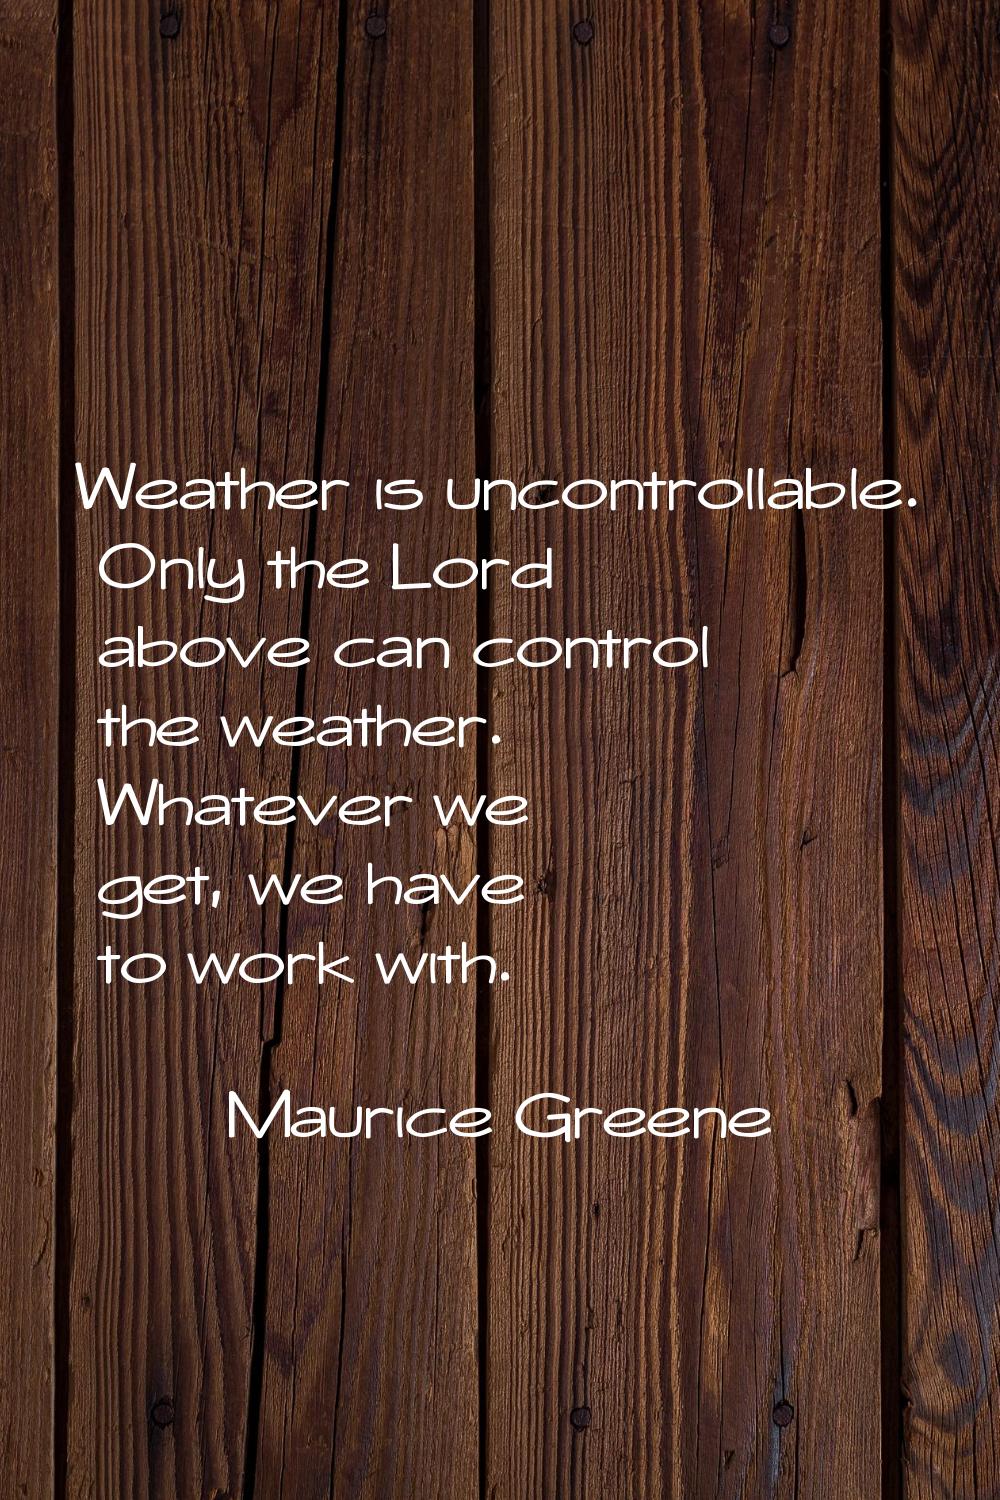 Weather is uncontrollable. Only the Lord above can control the weather. Whatever we get, we have to